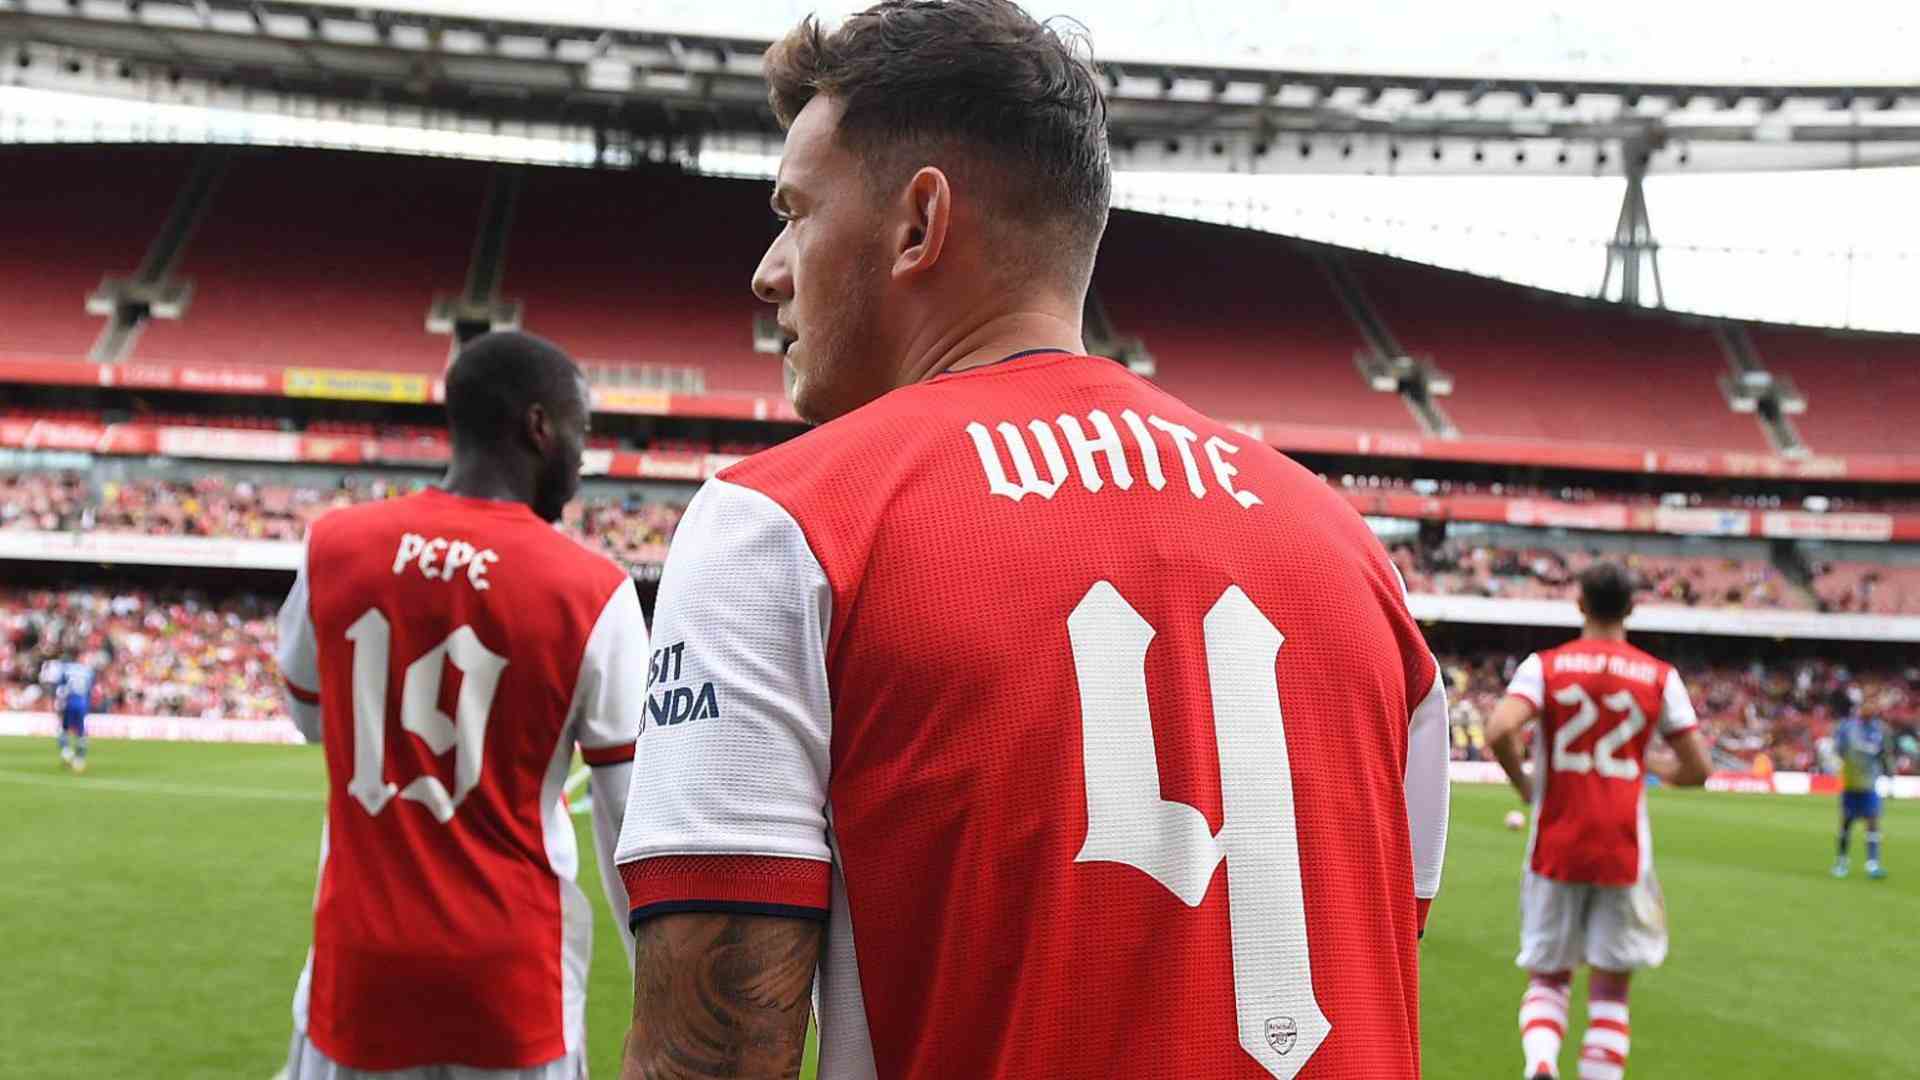 Defender Ben White recently signed for Arsenal in a deal involving a transfer fee of £50m. (Image Credit: Twitter/@ben6white)